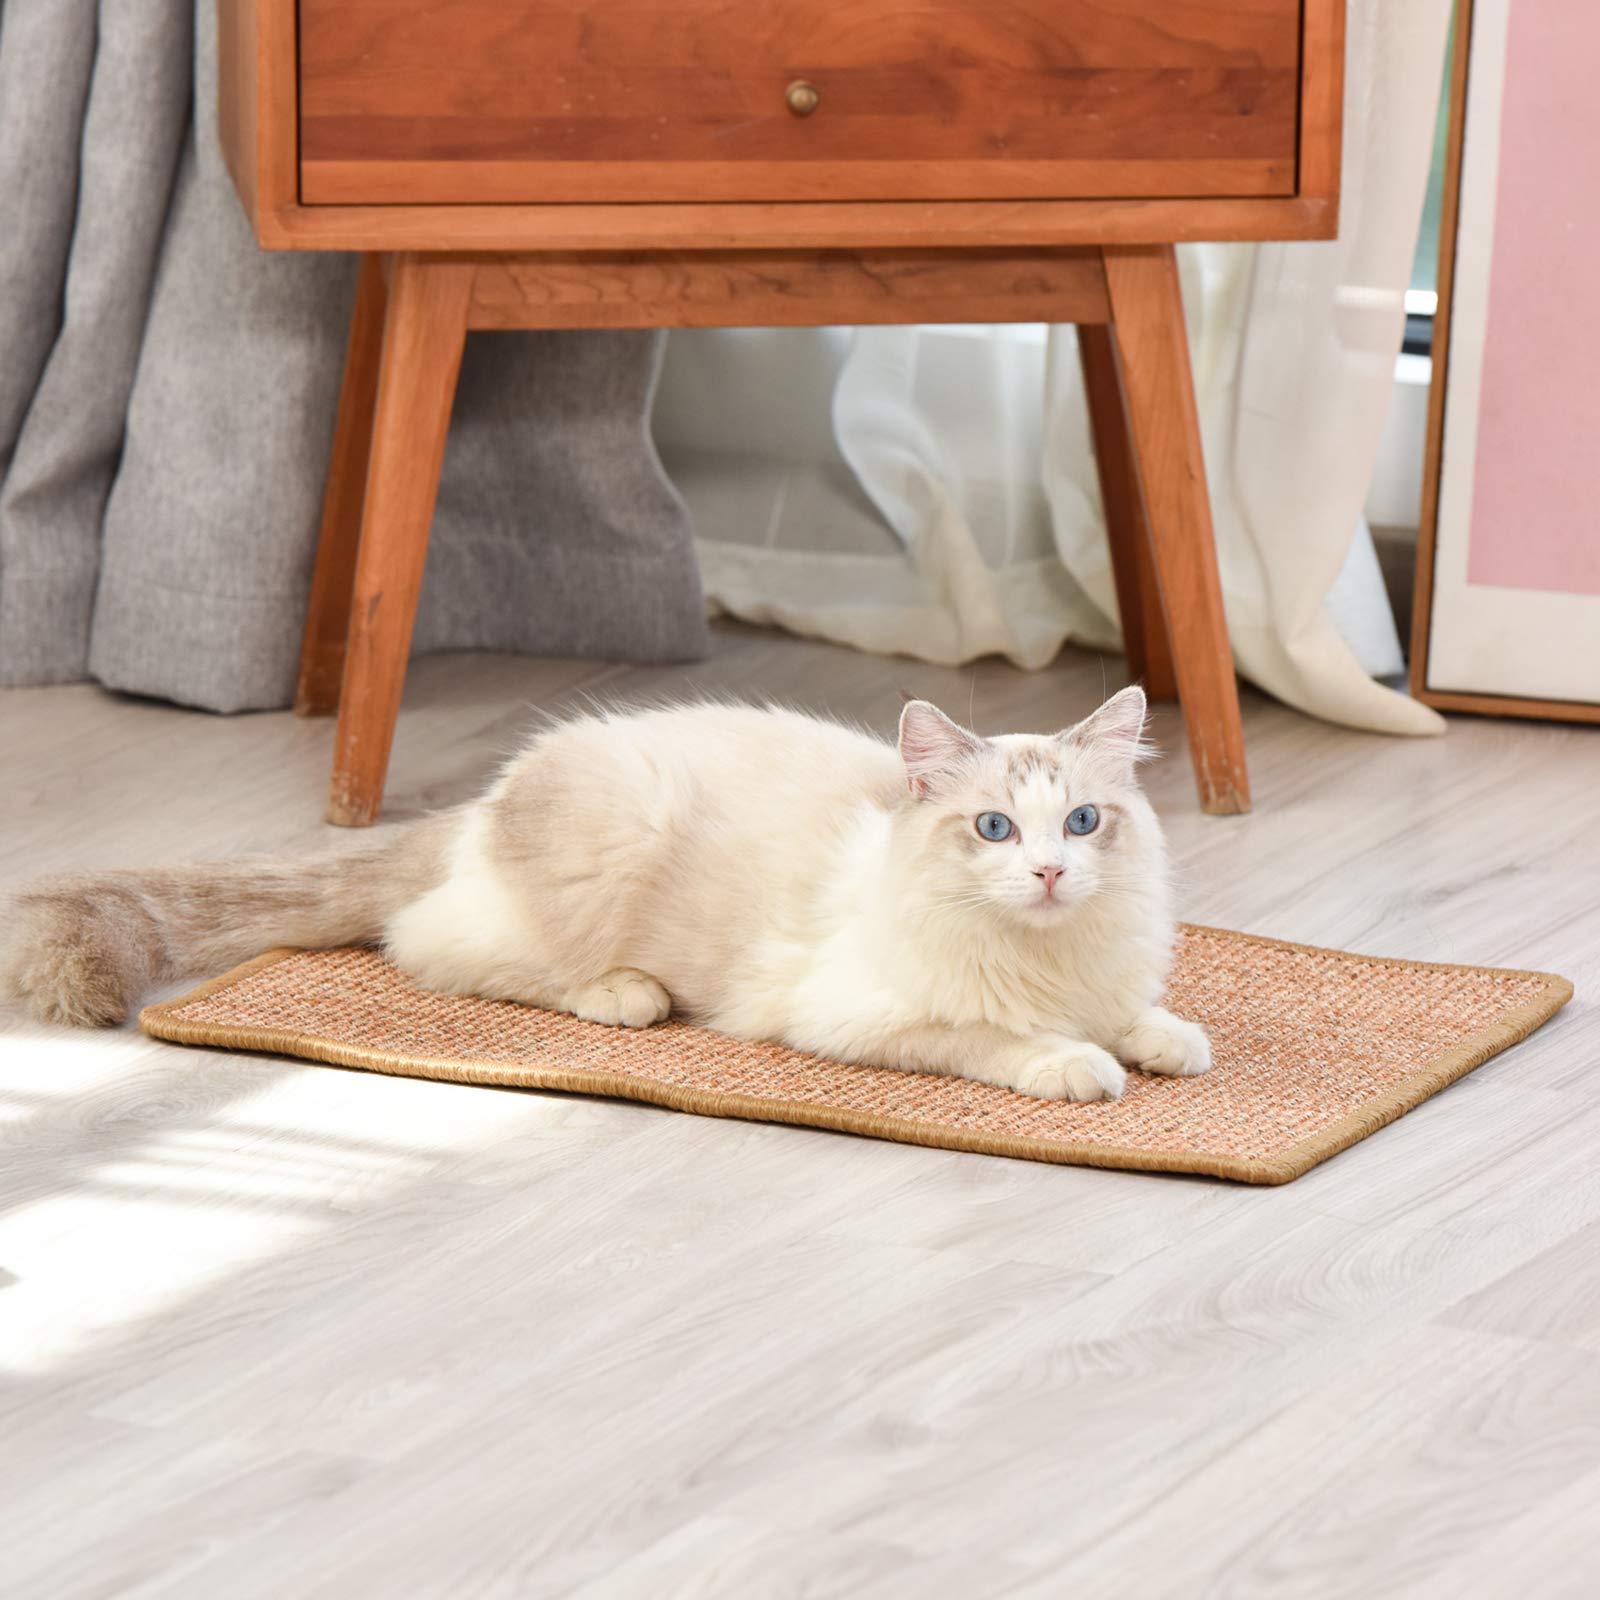 FUKUMARU Cat Scratcher Mat, 23.6 X 15.7 Inch Natural Sisal Cat Scratch Mats, Horizontal Cat Floor Scratching Pad Rug with Sticky Velcro Tapes, Protect Couch and Carpets